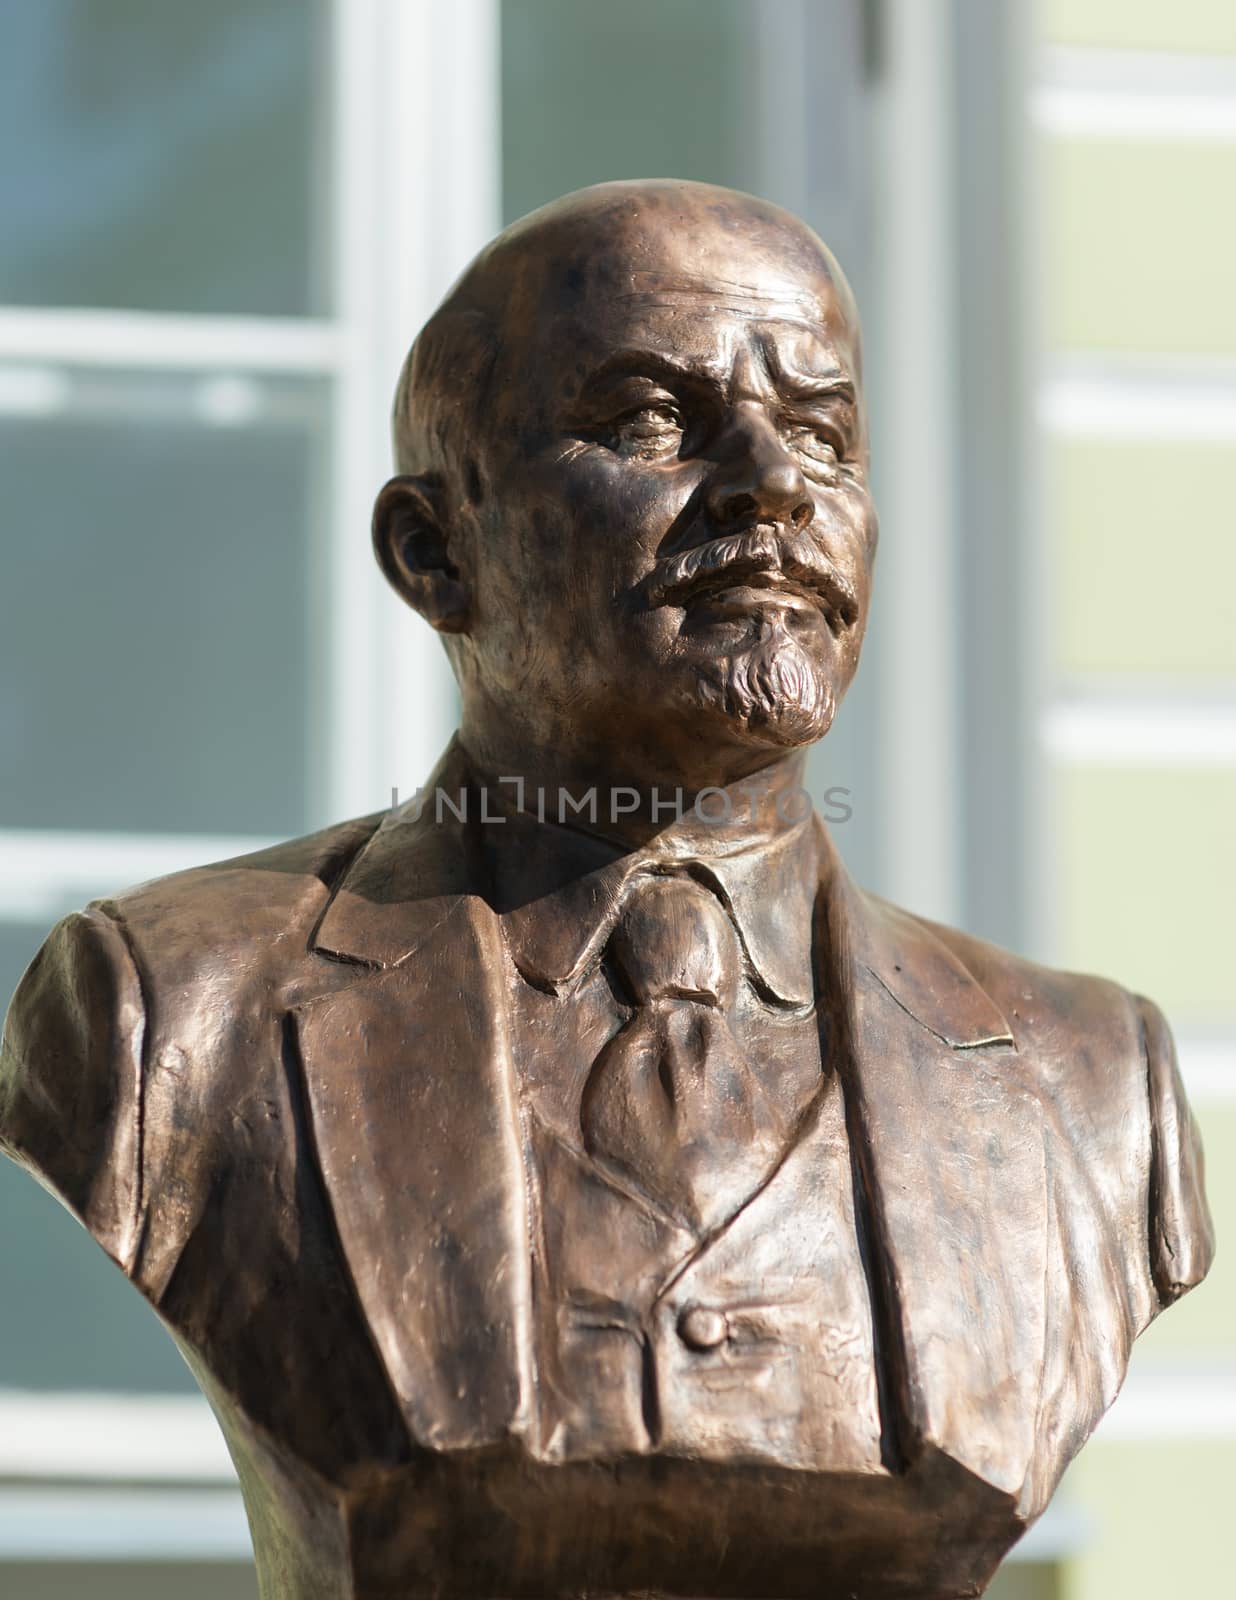 September 23, 2017 Moscow Russia Bust Chairman of the Council of People's Commissars of the USSR Vladimir Lenin made Zurab Tsereteli at the Rulers Alley in Moscow.